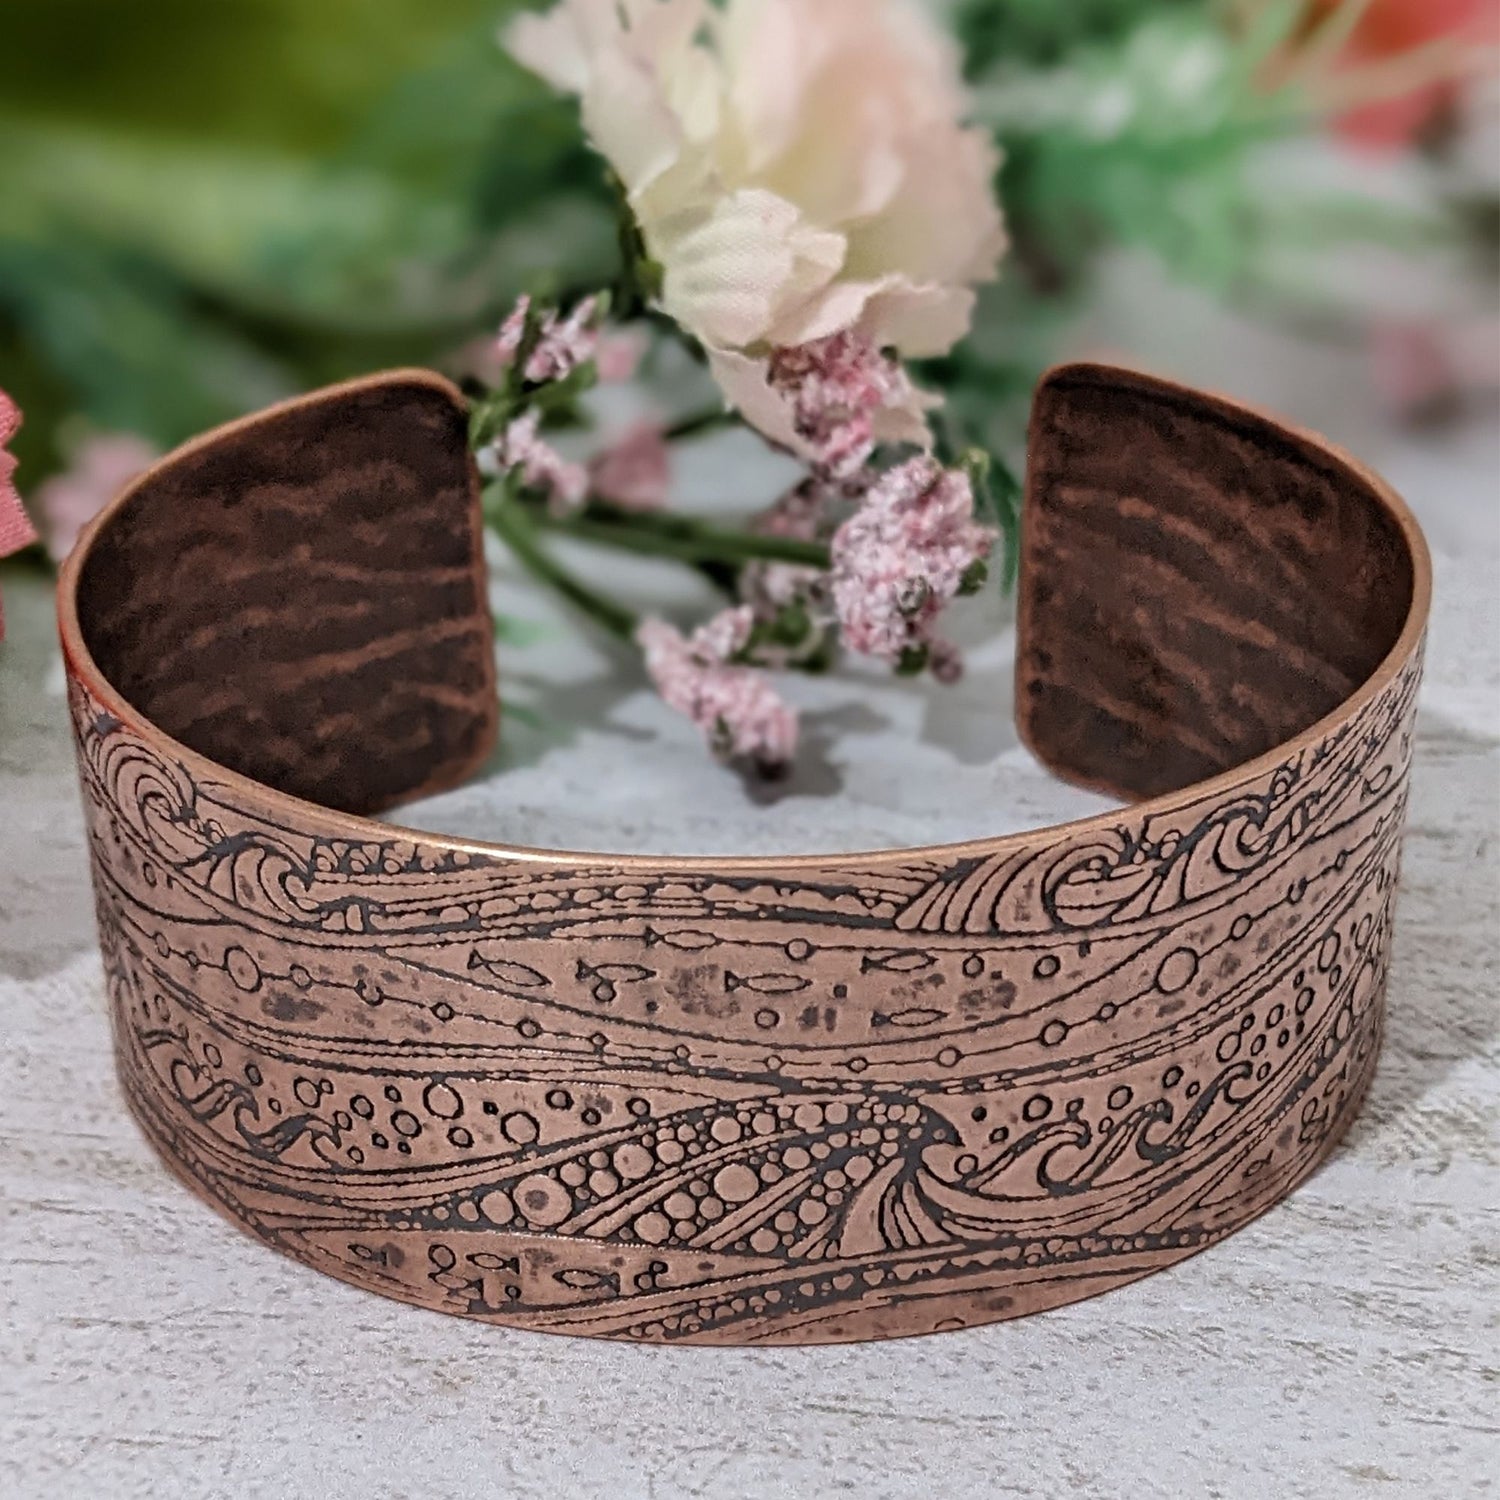 One inch wide copper cuff with a pattern of cresting waves, small fish, and air bubbles. The impression is darkened to highlight the details